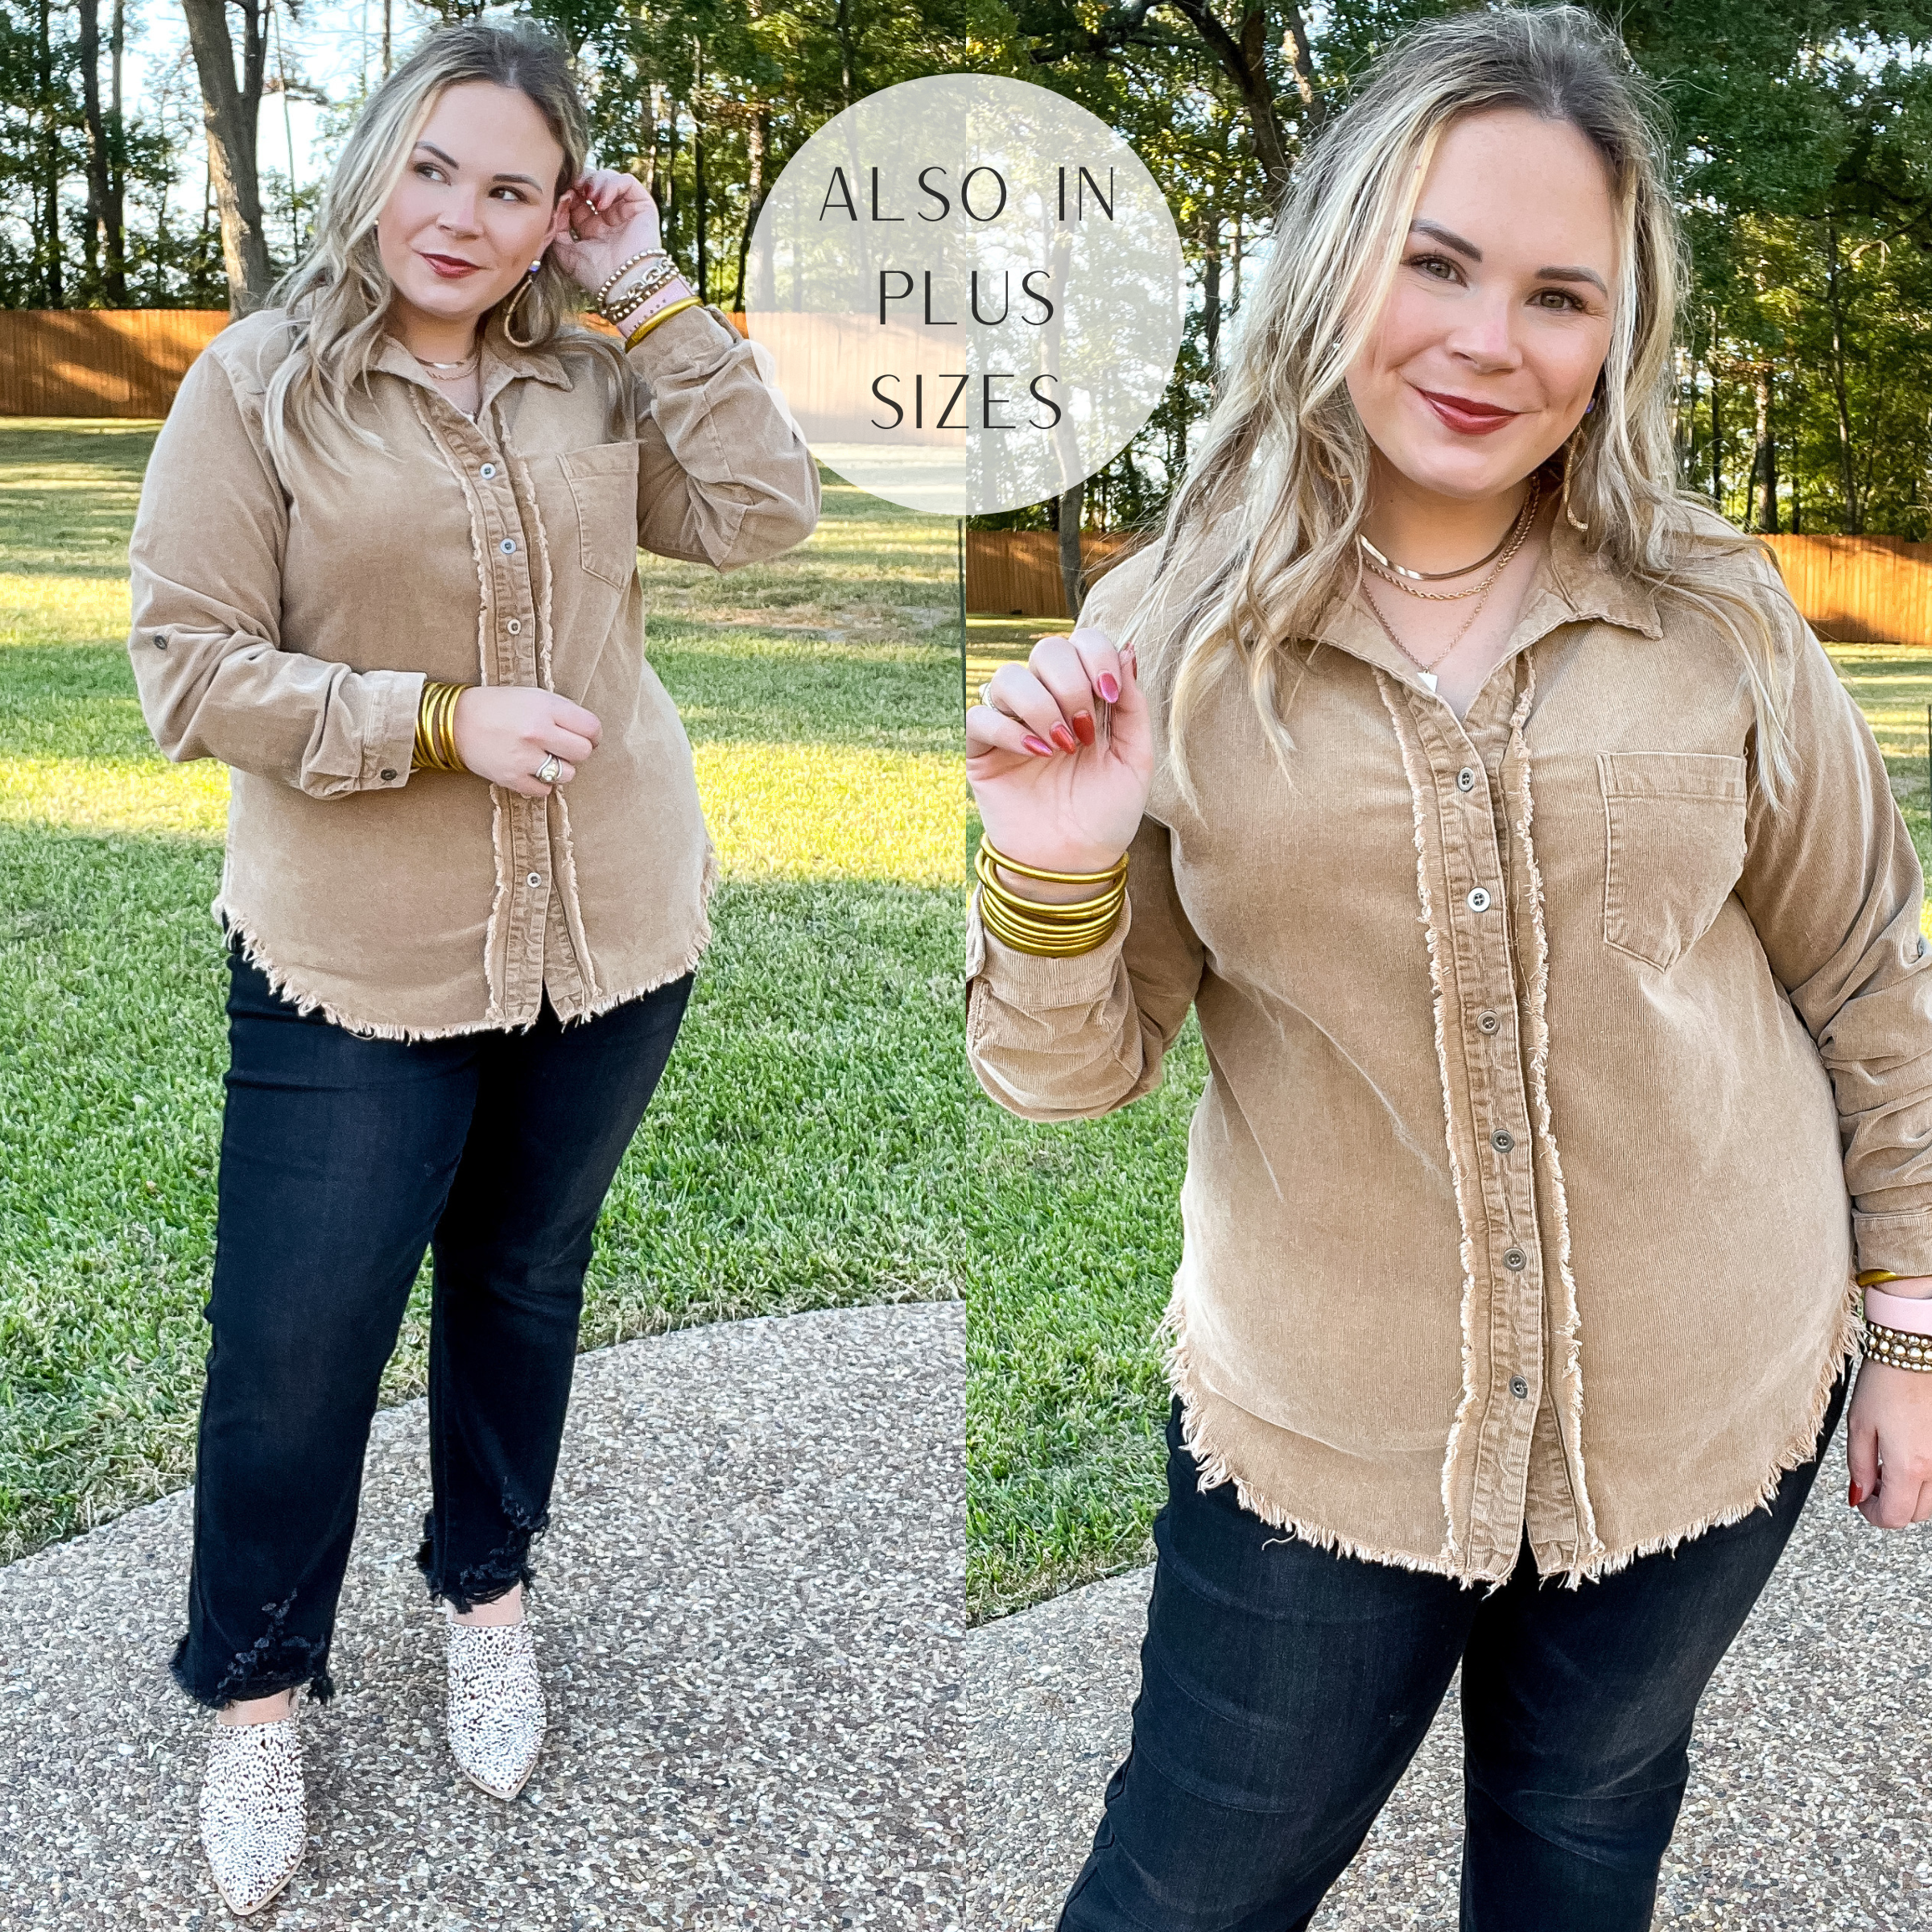 Model is wearing a beige button up top with a raw hemline and button up front. Model has it paired with black boyfriend jeans and gold jewelry.